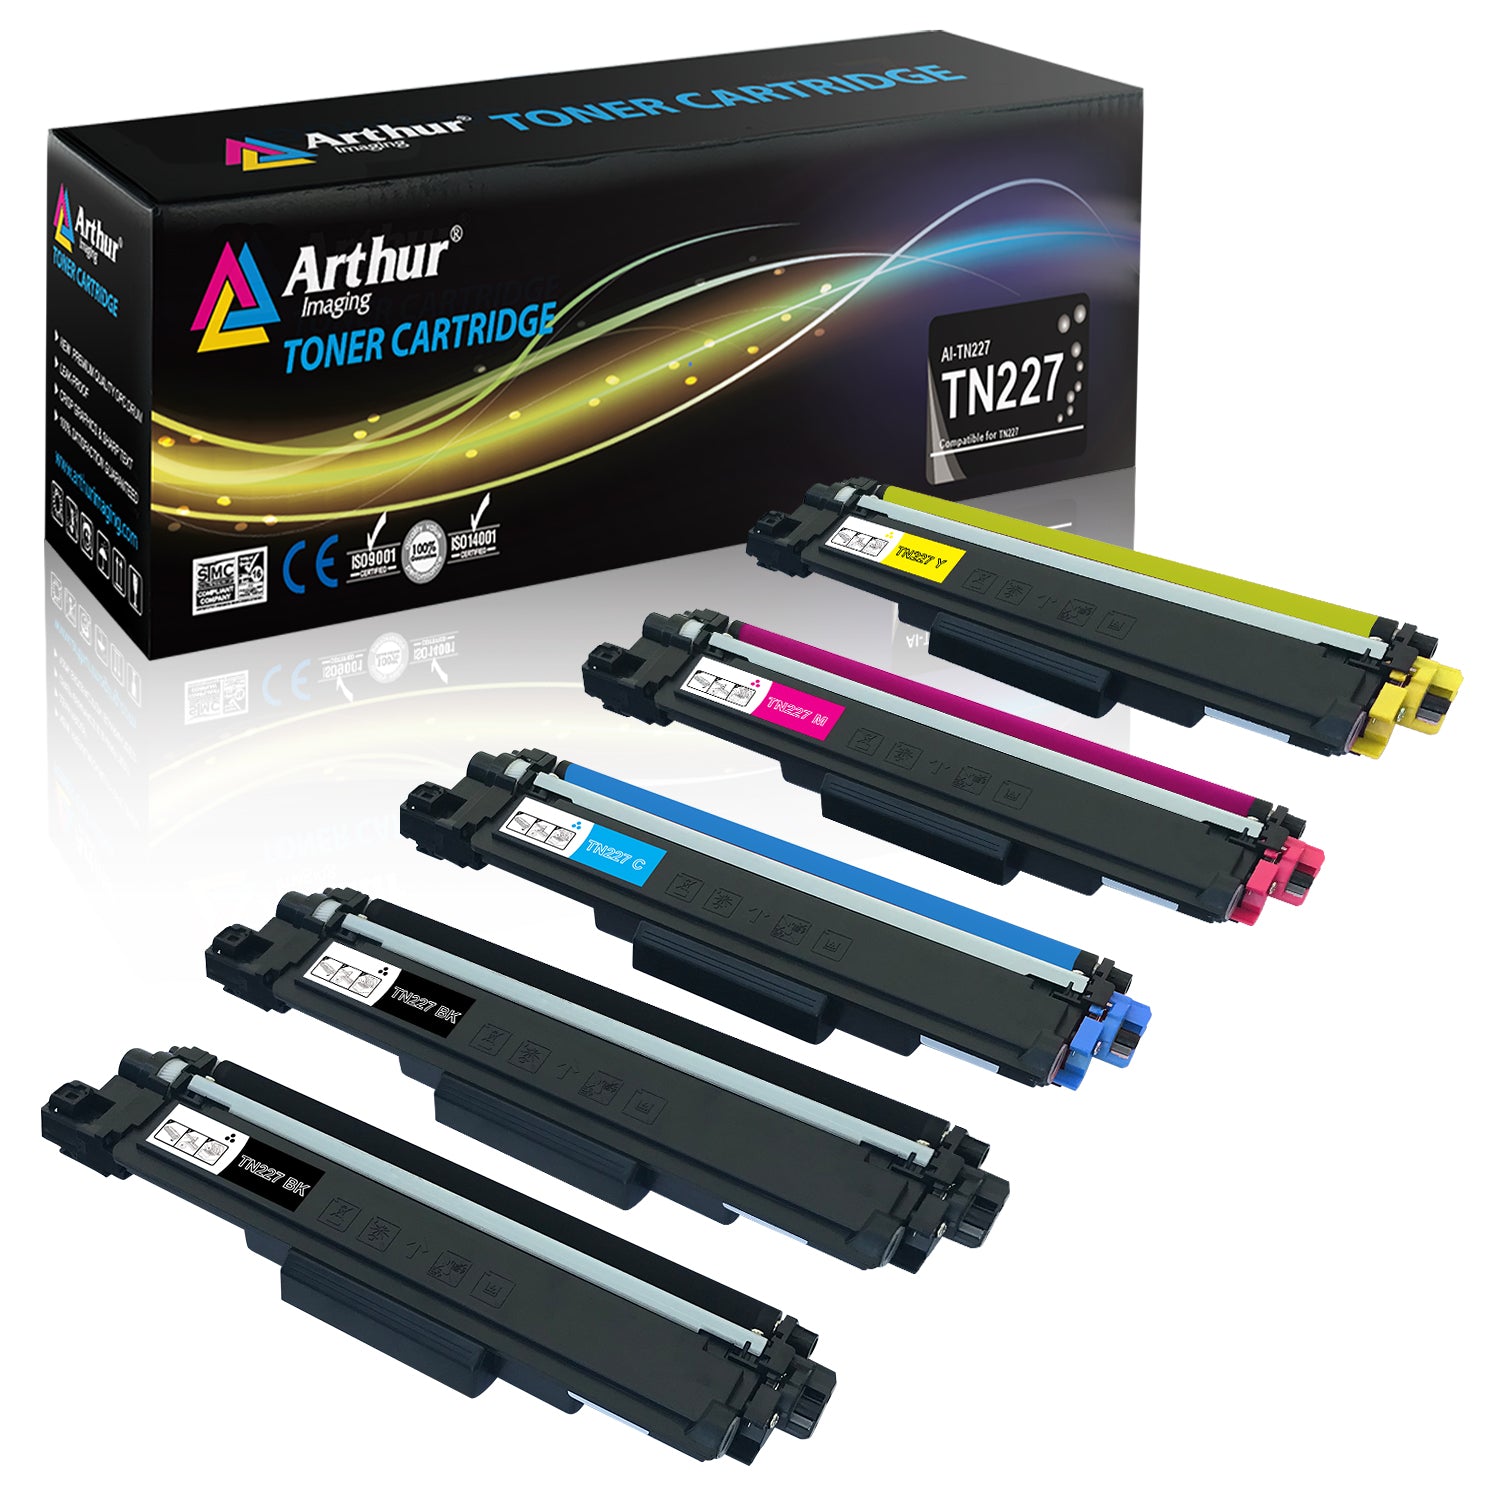 Arthur Imaging Compatible Toner Cartridge Replacement for Brother TN223 TN227 (2 Black, 1 Cyan, 1 Yellow, 1 Magenta, 5-Pack)